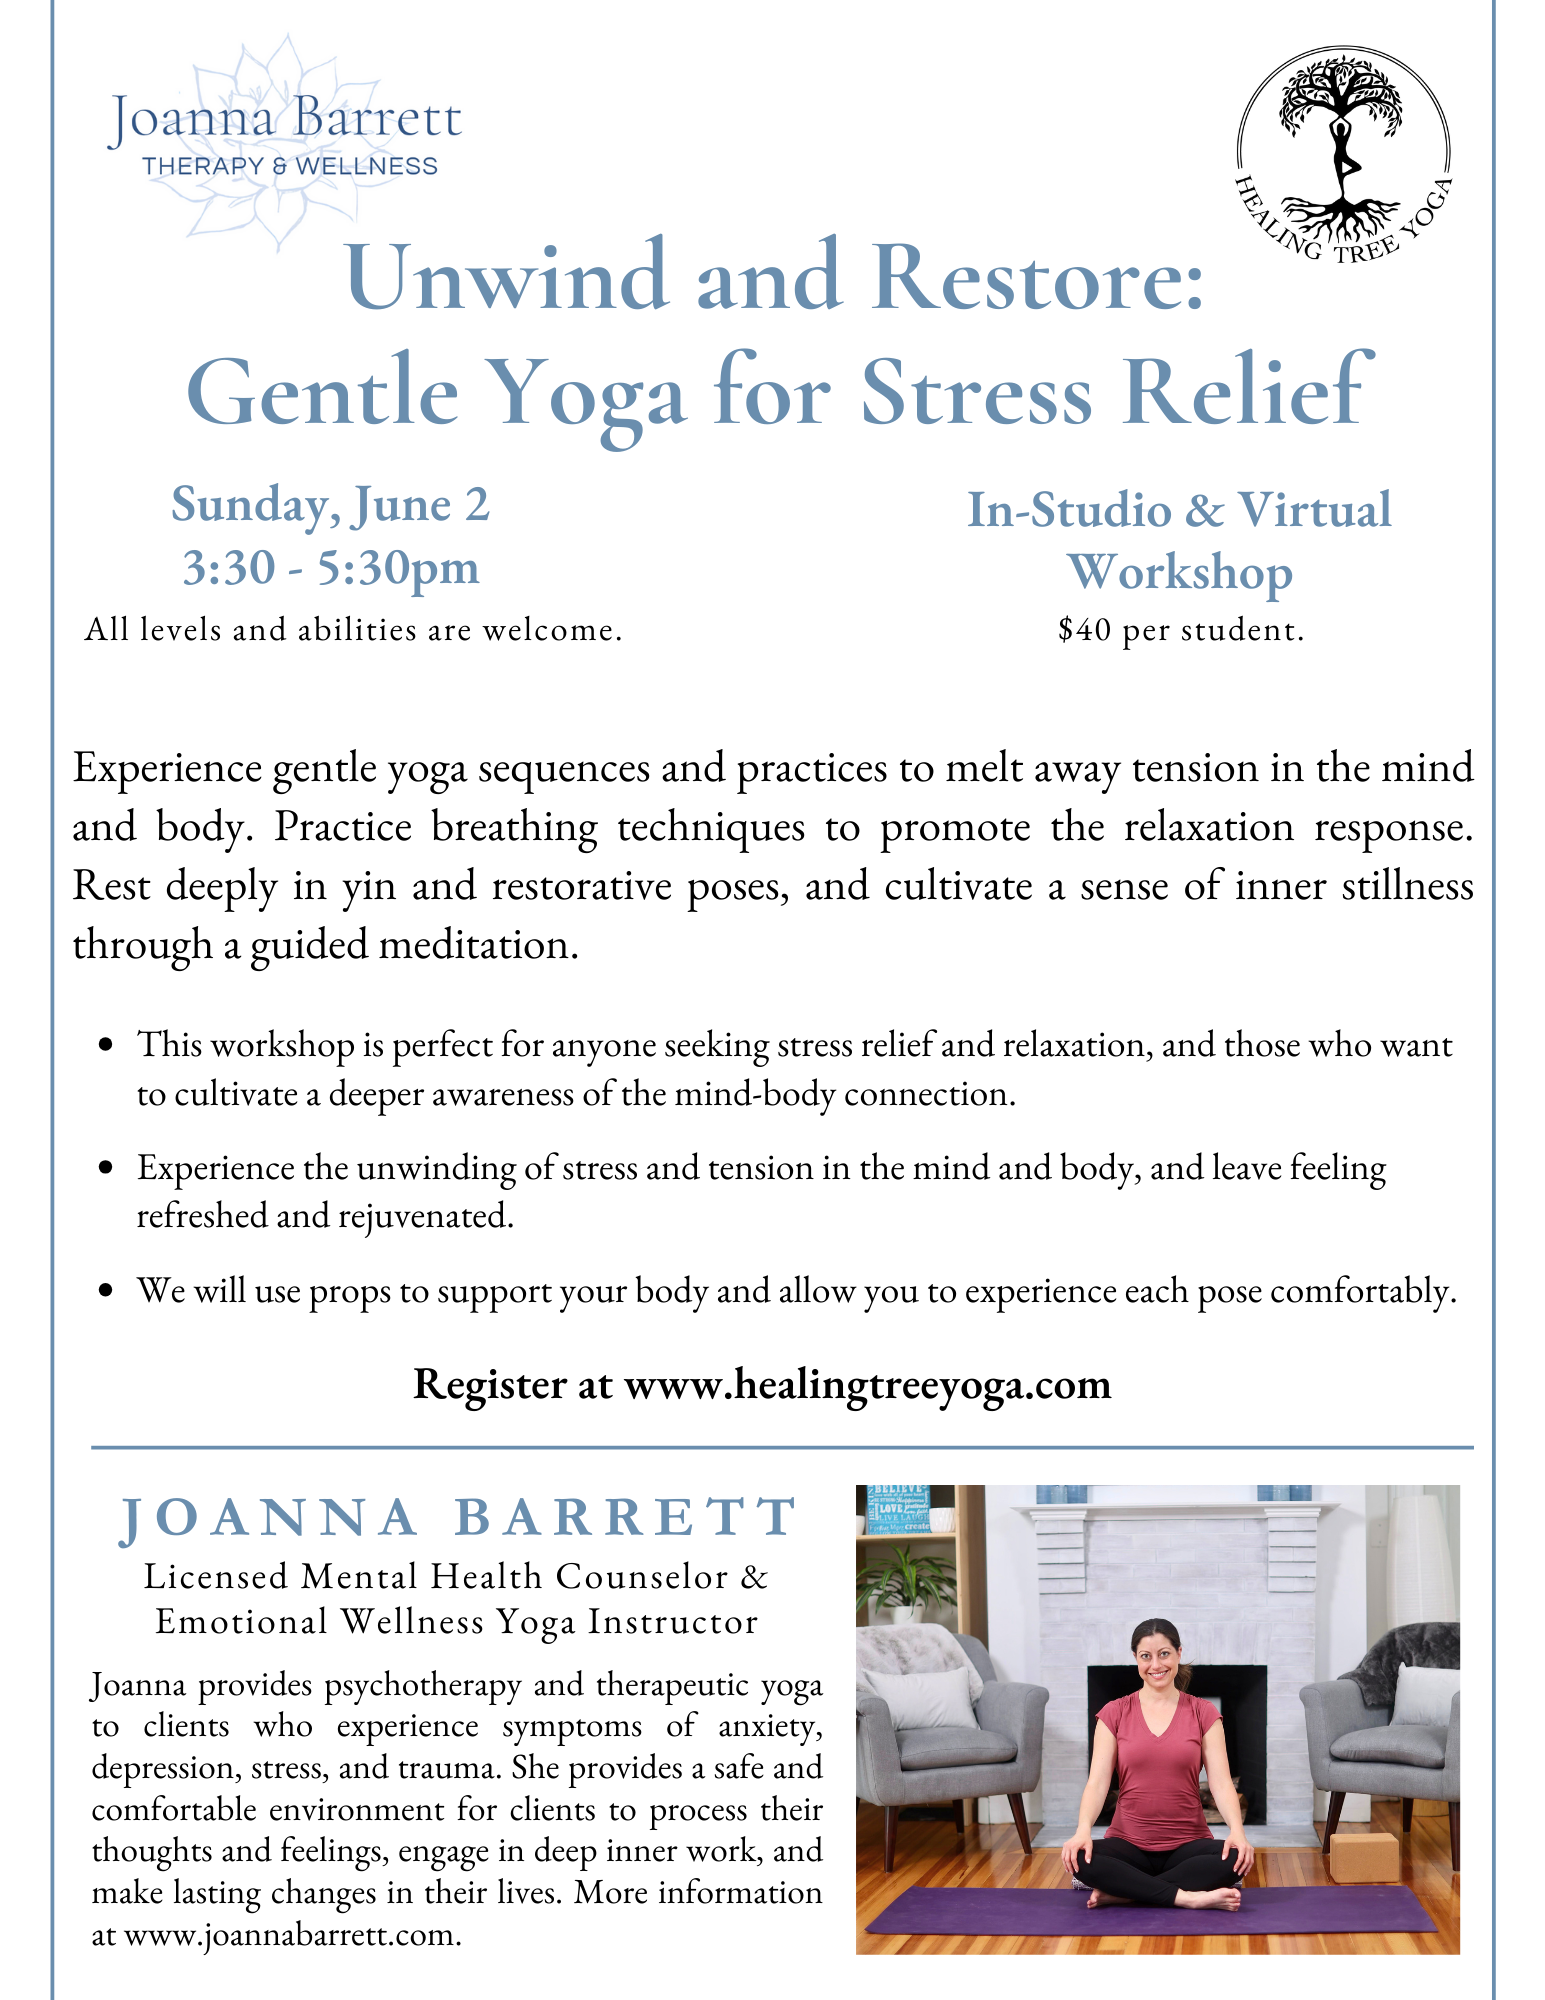 Unwind and Restore: Gentle Yoga for Stress Relief